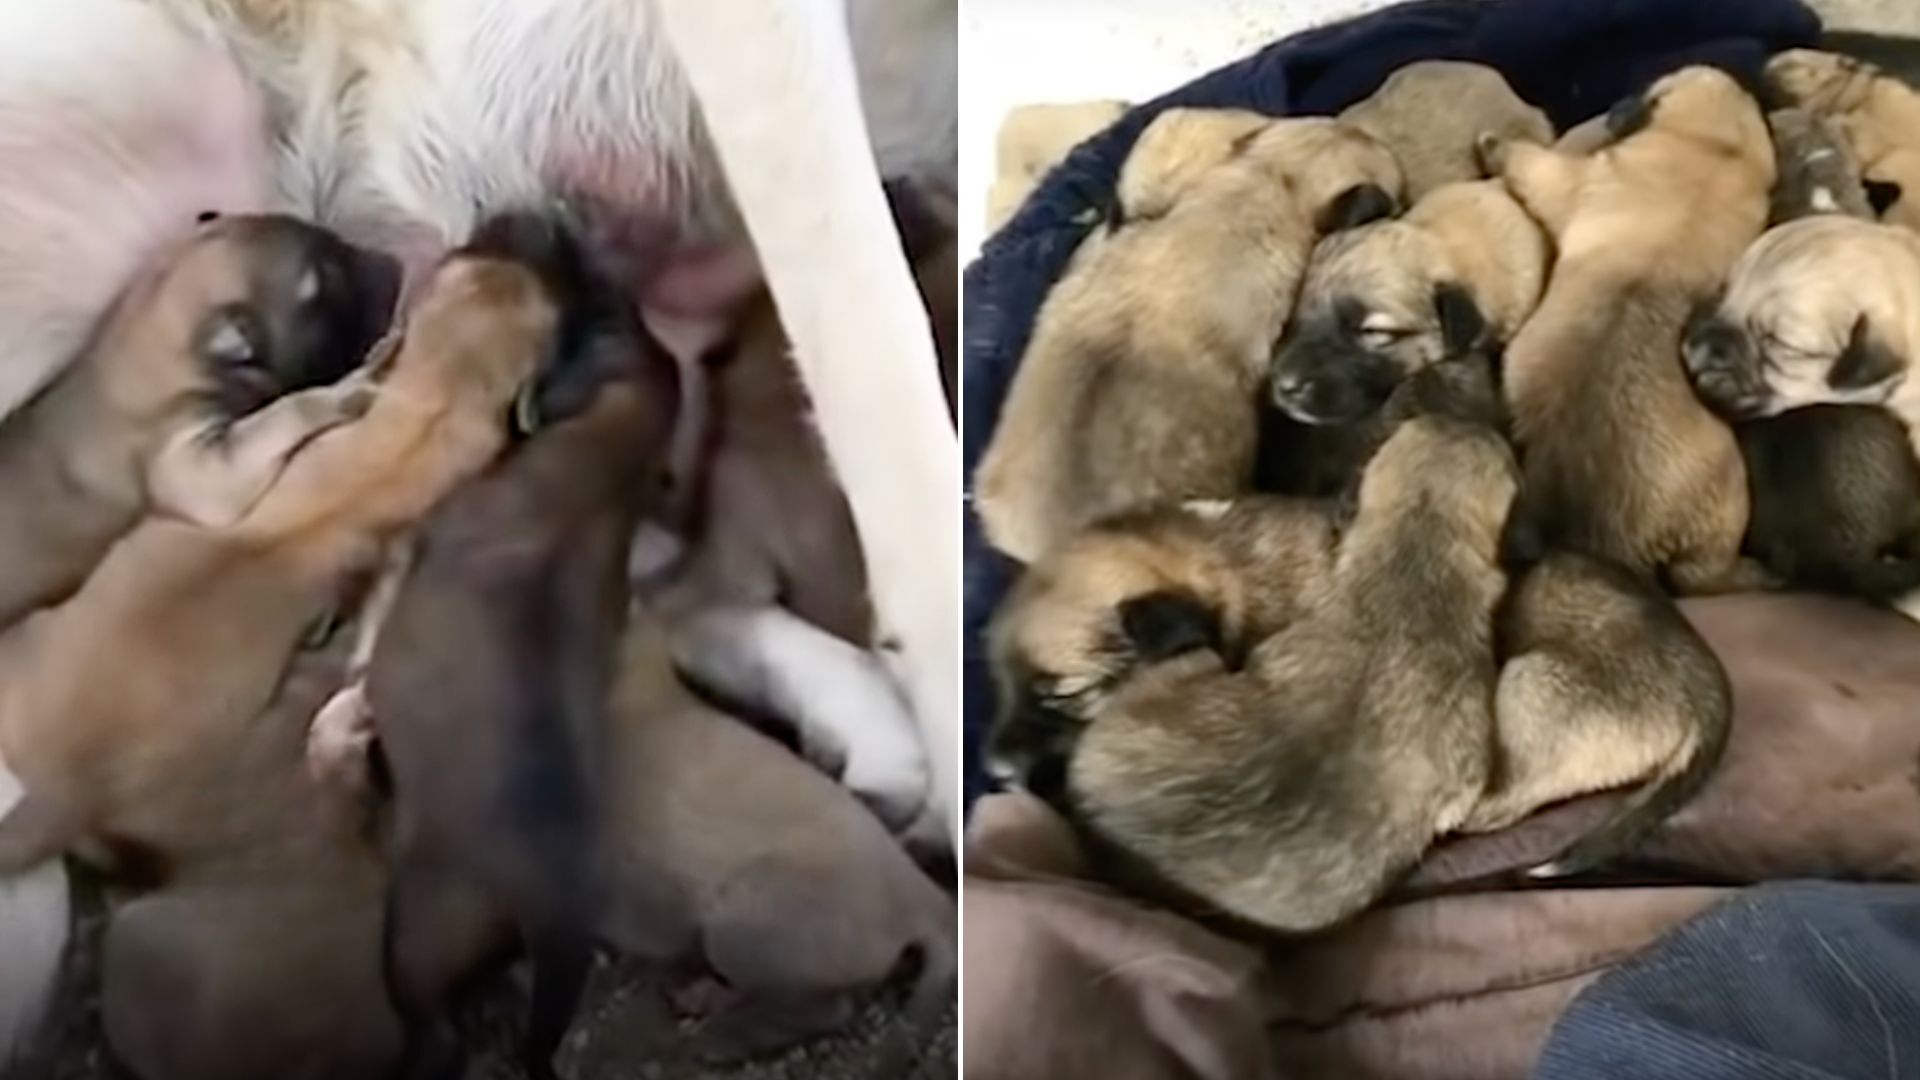 A Kind Mama Dog Adopts 8 Orphaned Puppies Even Though She Has 10 Of Her Own